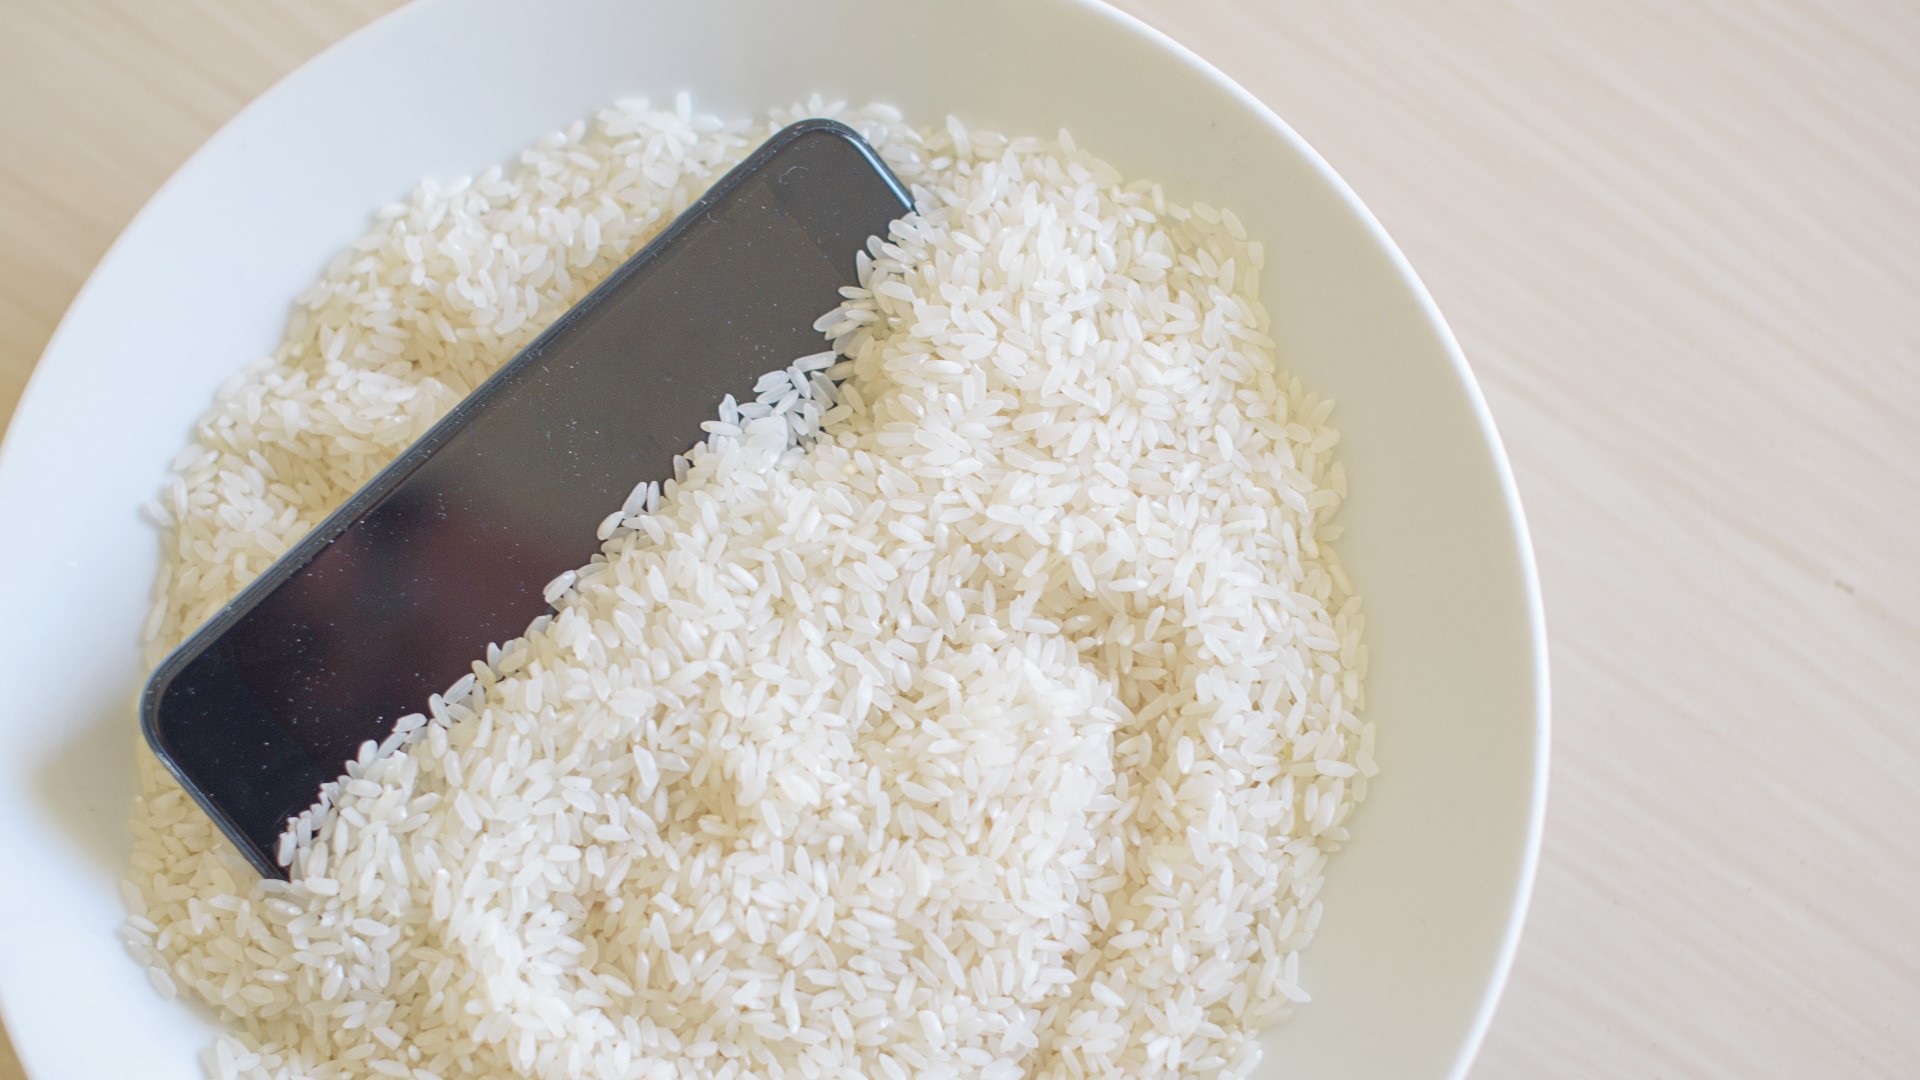 Many rush to find a bag of rice to try to soak out all of the water as soon as their phone accidentally gets submerged in water. Is that the right thing to do?